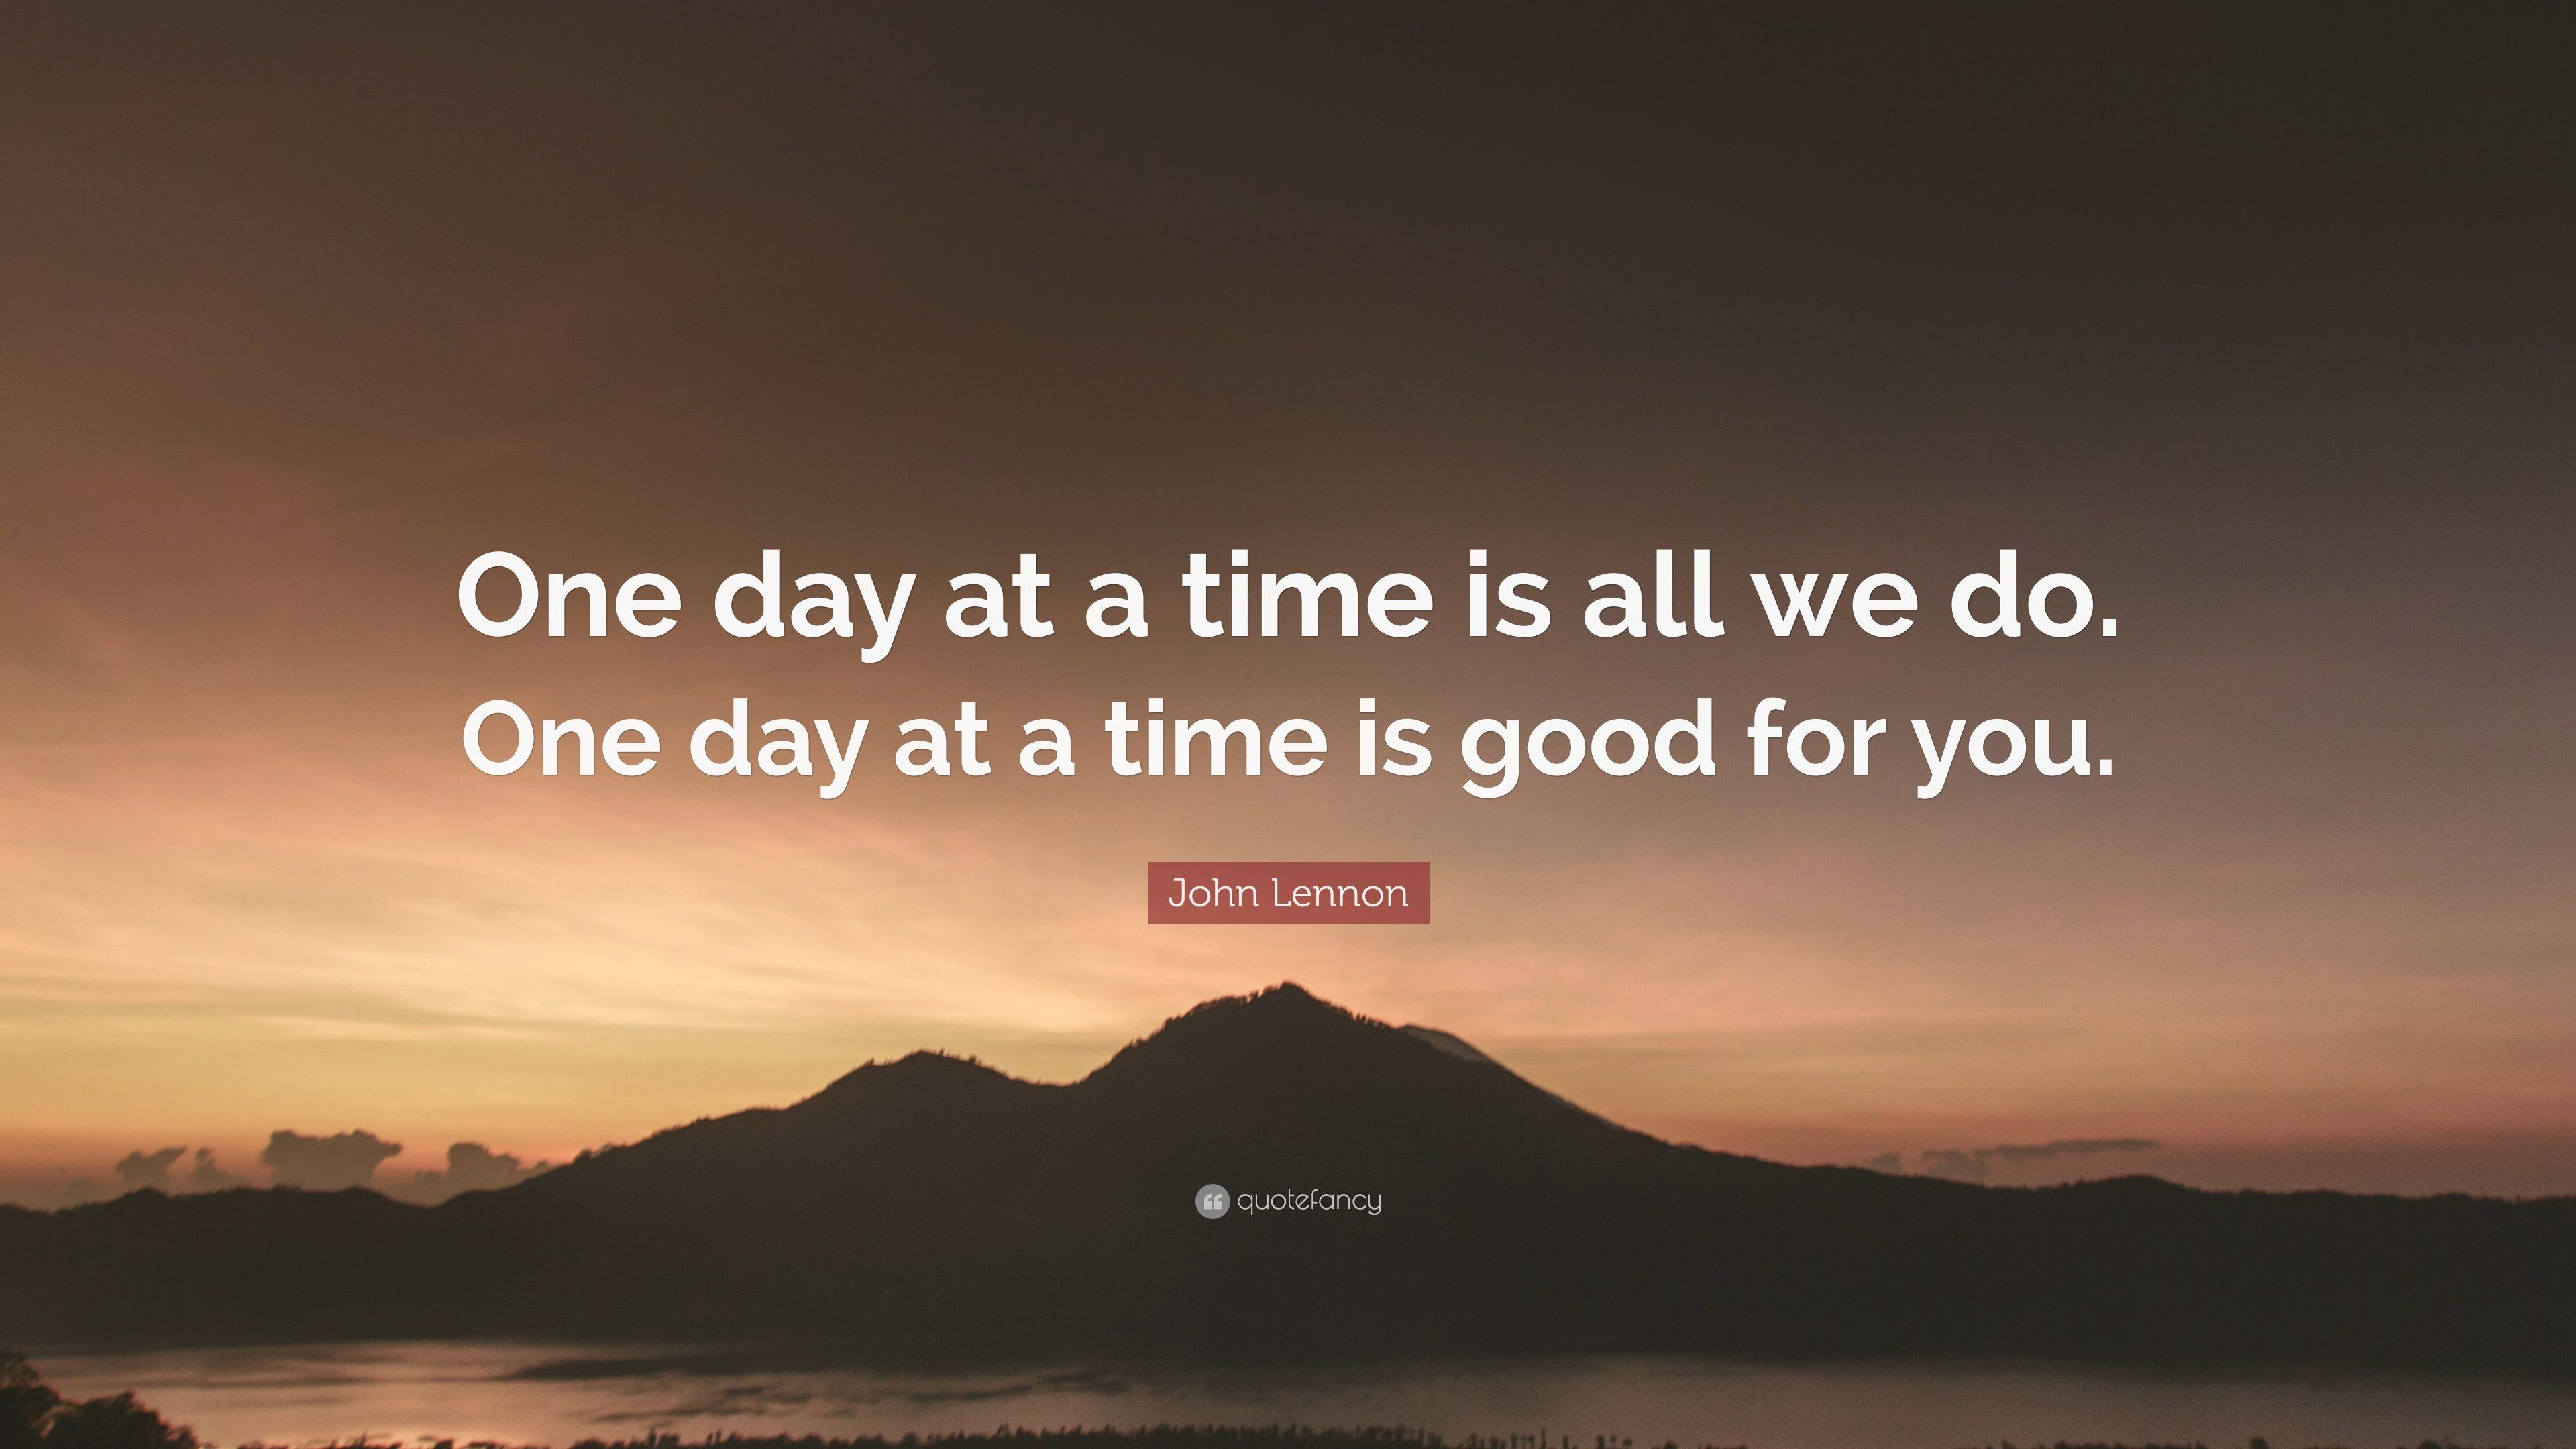 John Lennon Quote: “One day at a time is all we do. One day at a